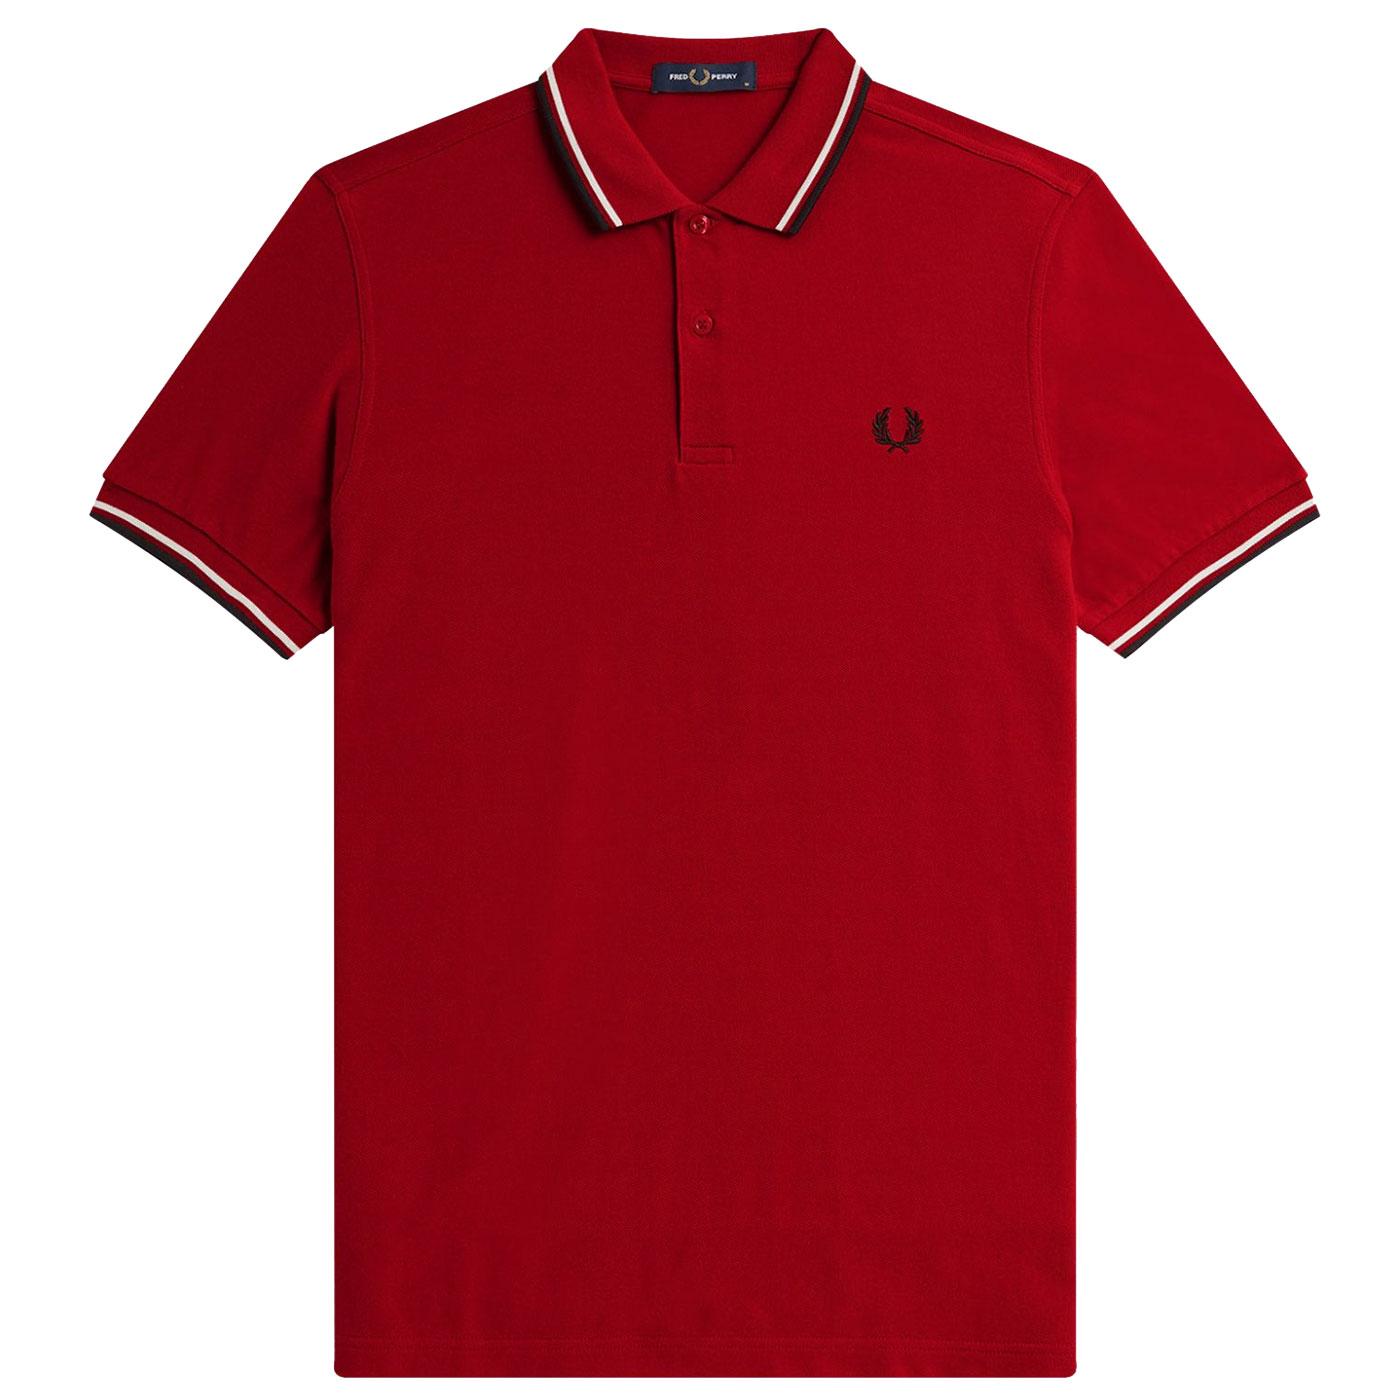 FRED PERRY M3600 Twin Tipped Mod Polo Shirt BLOOD